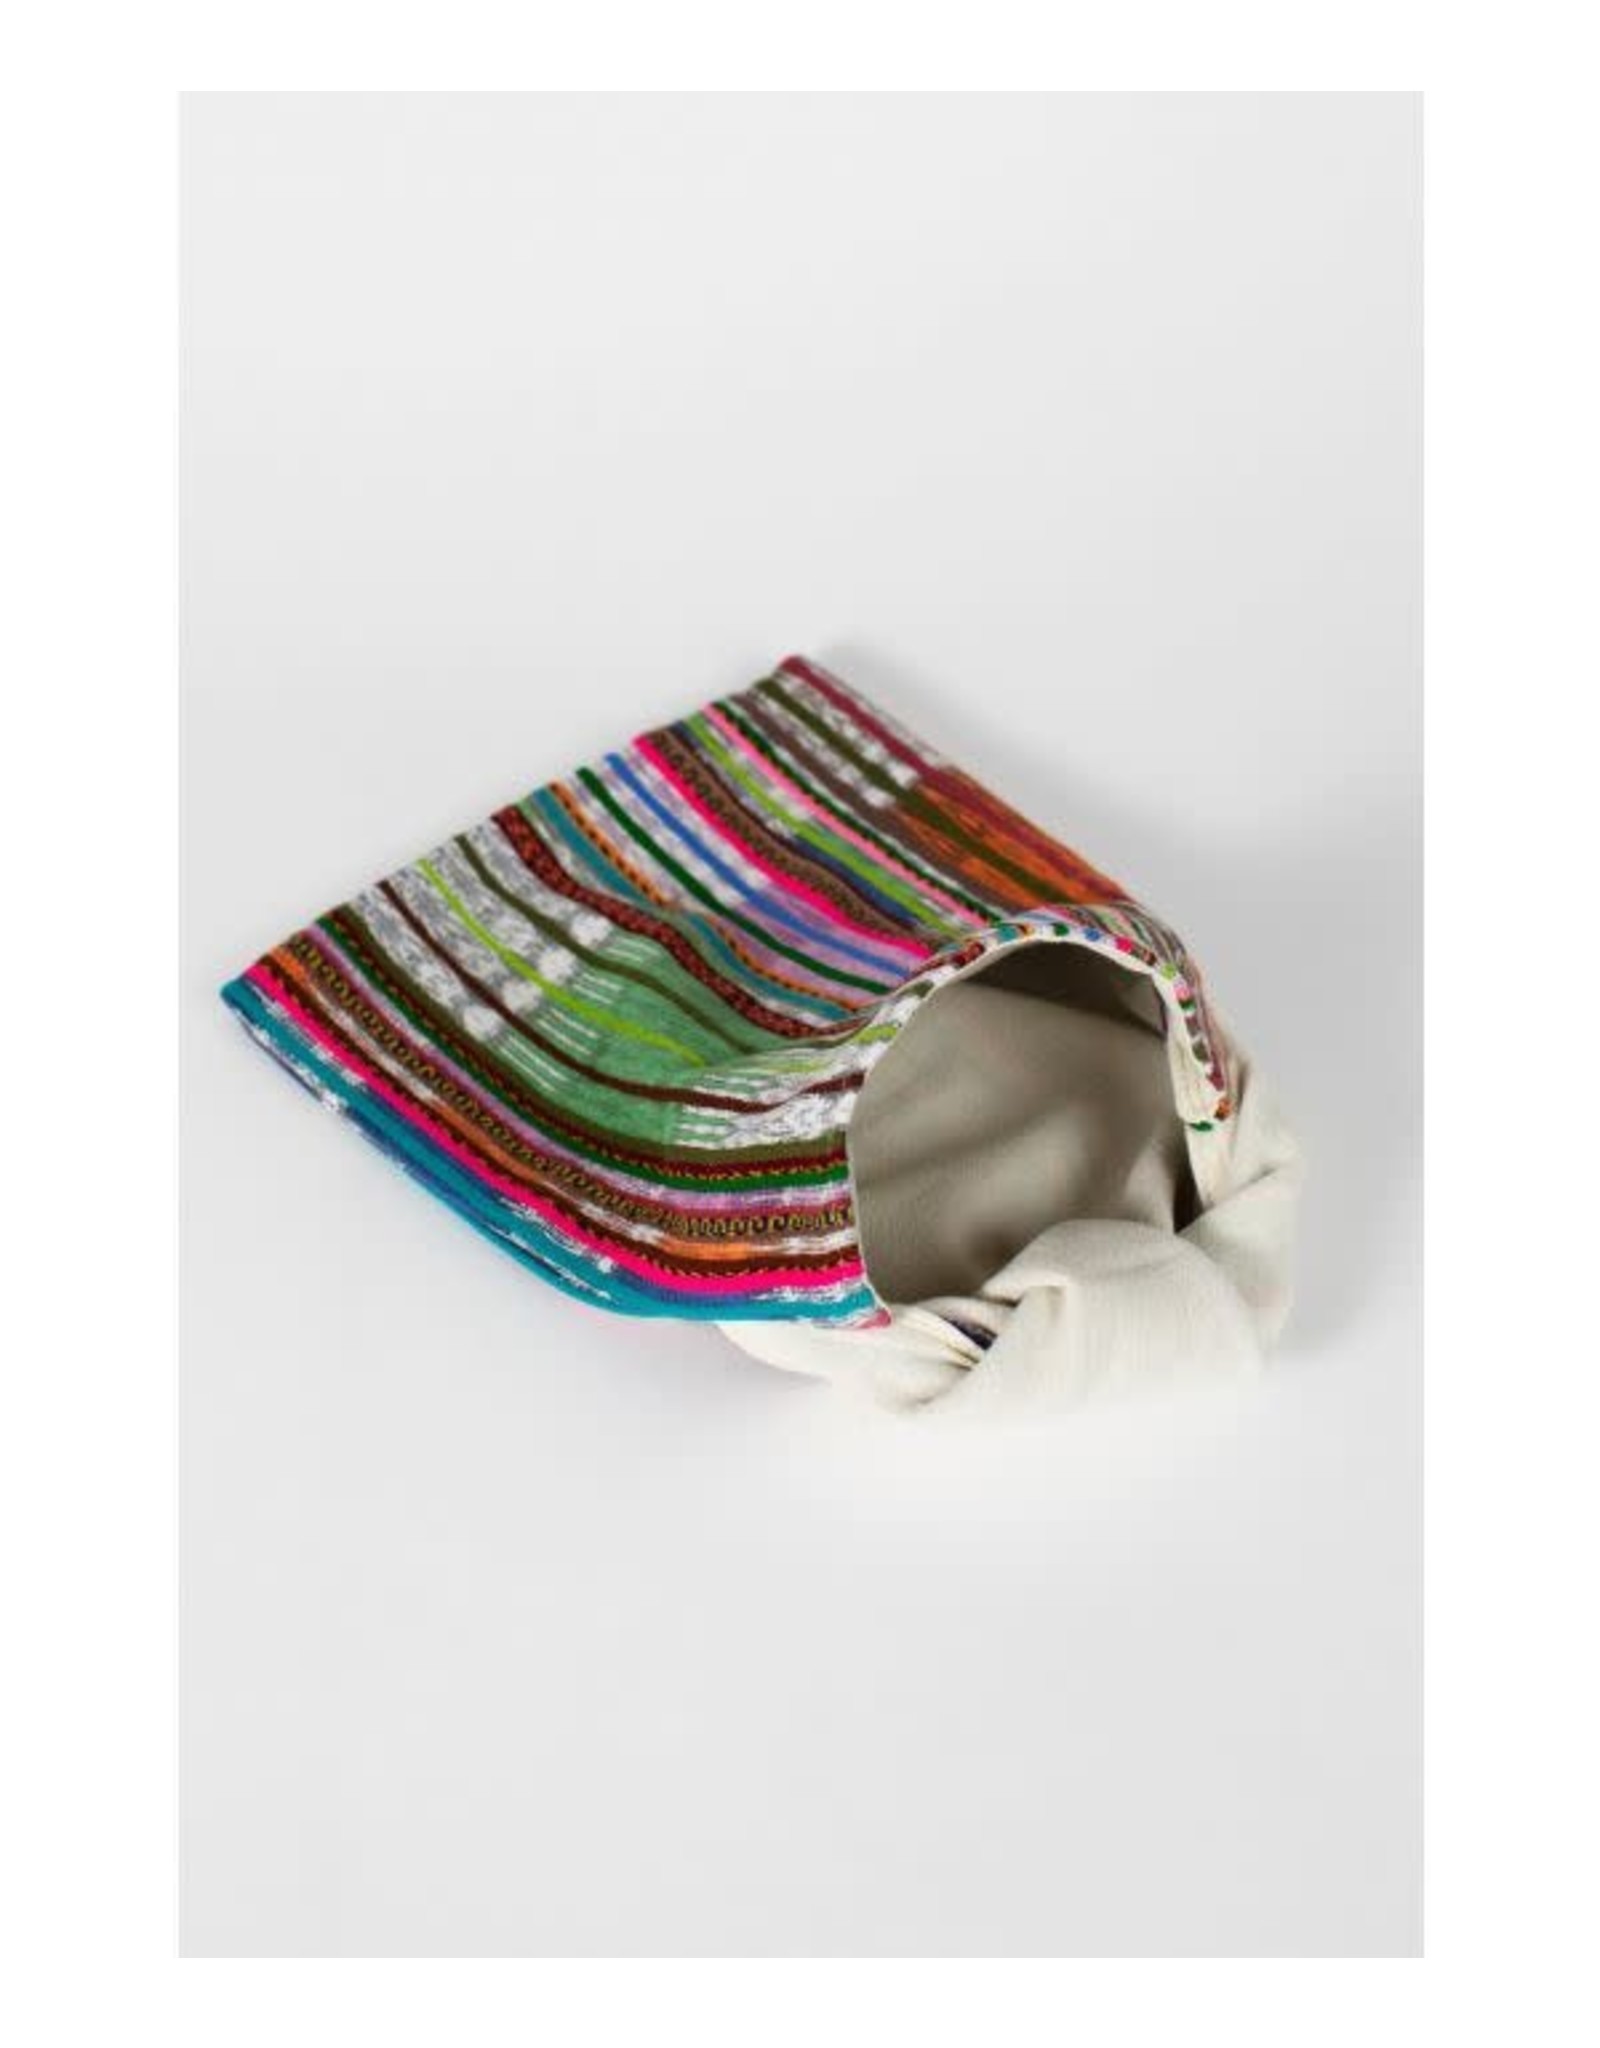 Trade roots Microwaveable Pouch, Guatemala